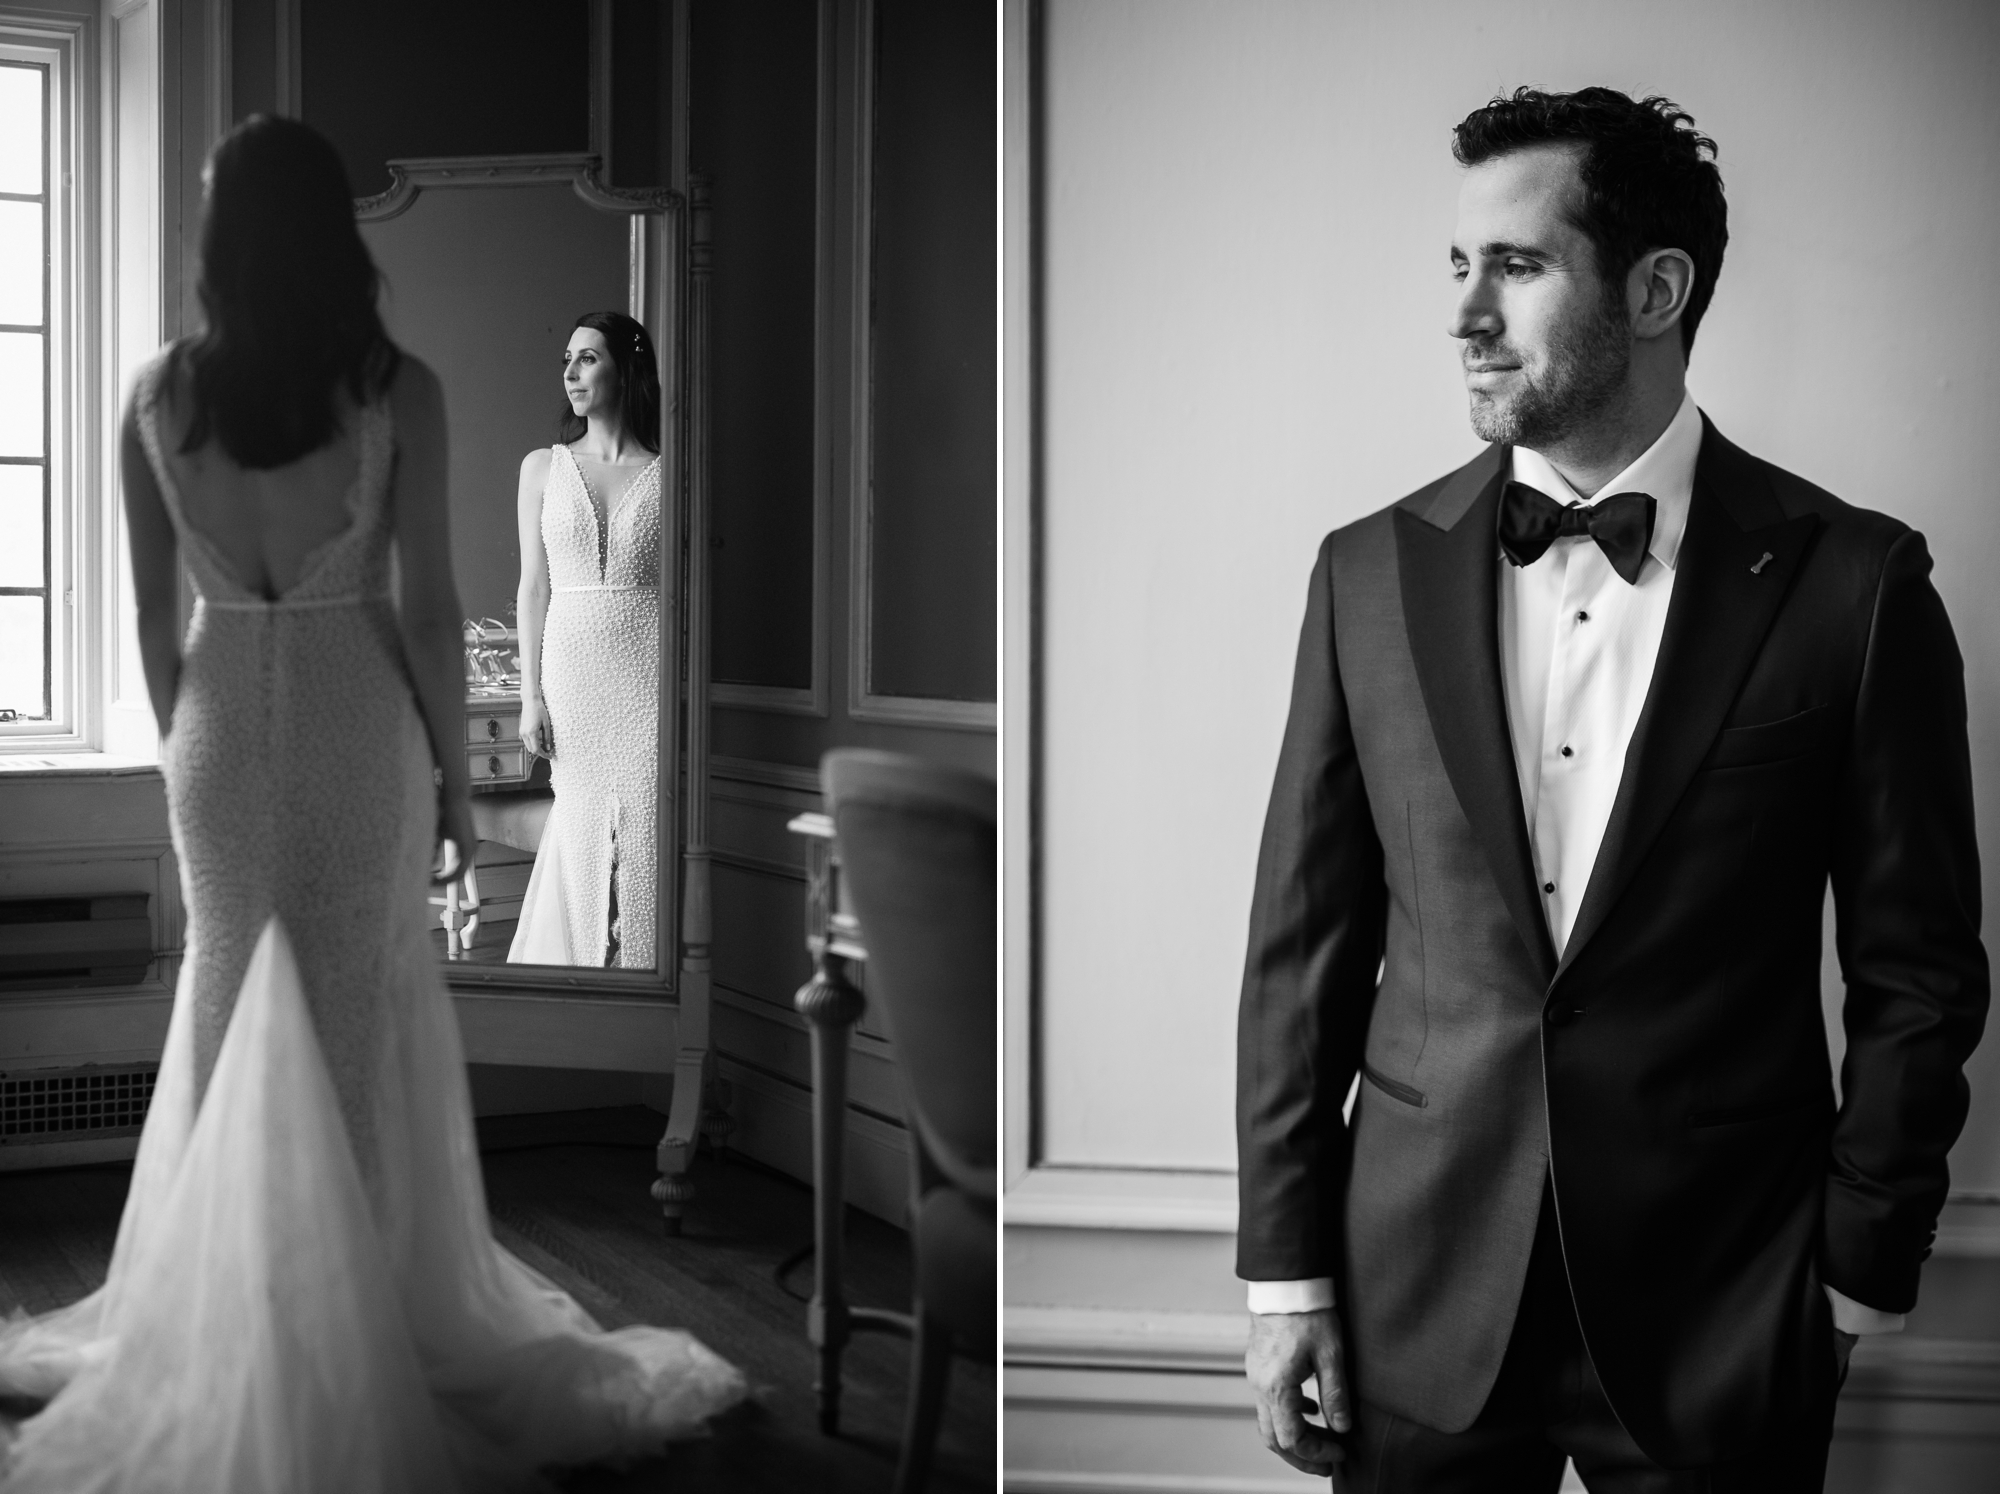 Black and White portraits of the Brides reflection in her wedding dress at Casa Loma in Toronto